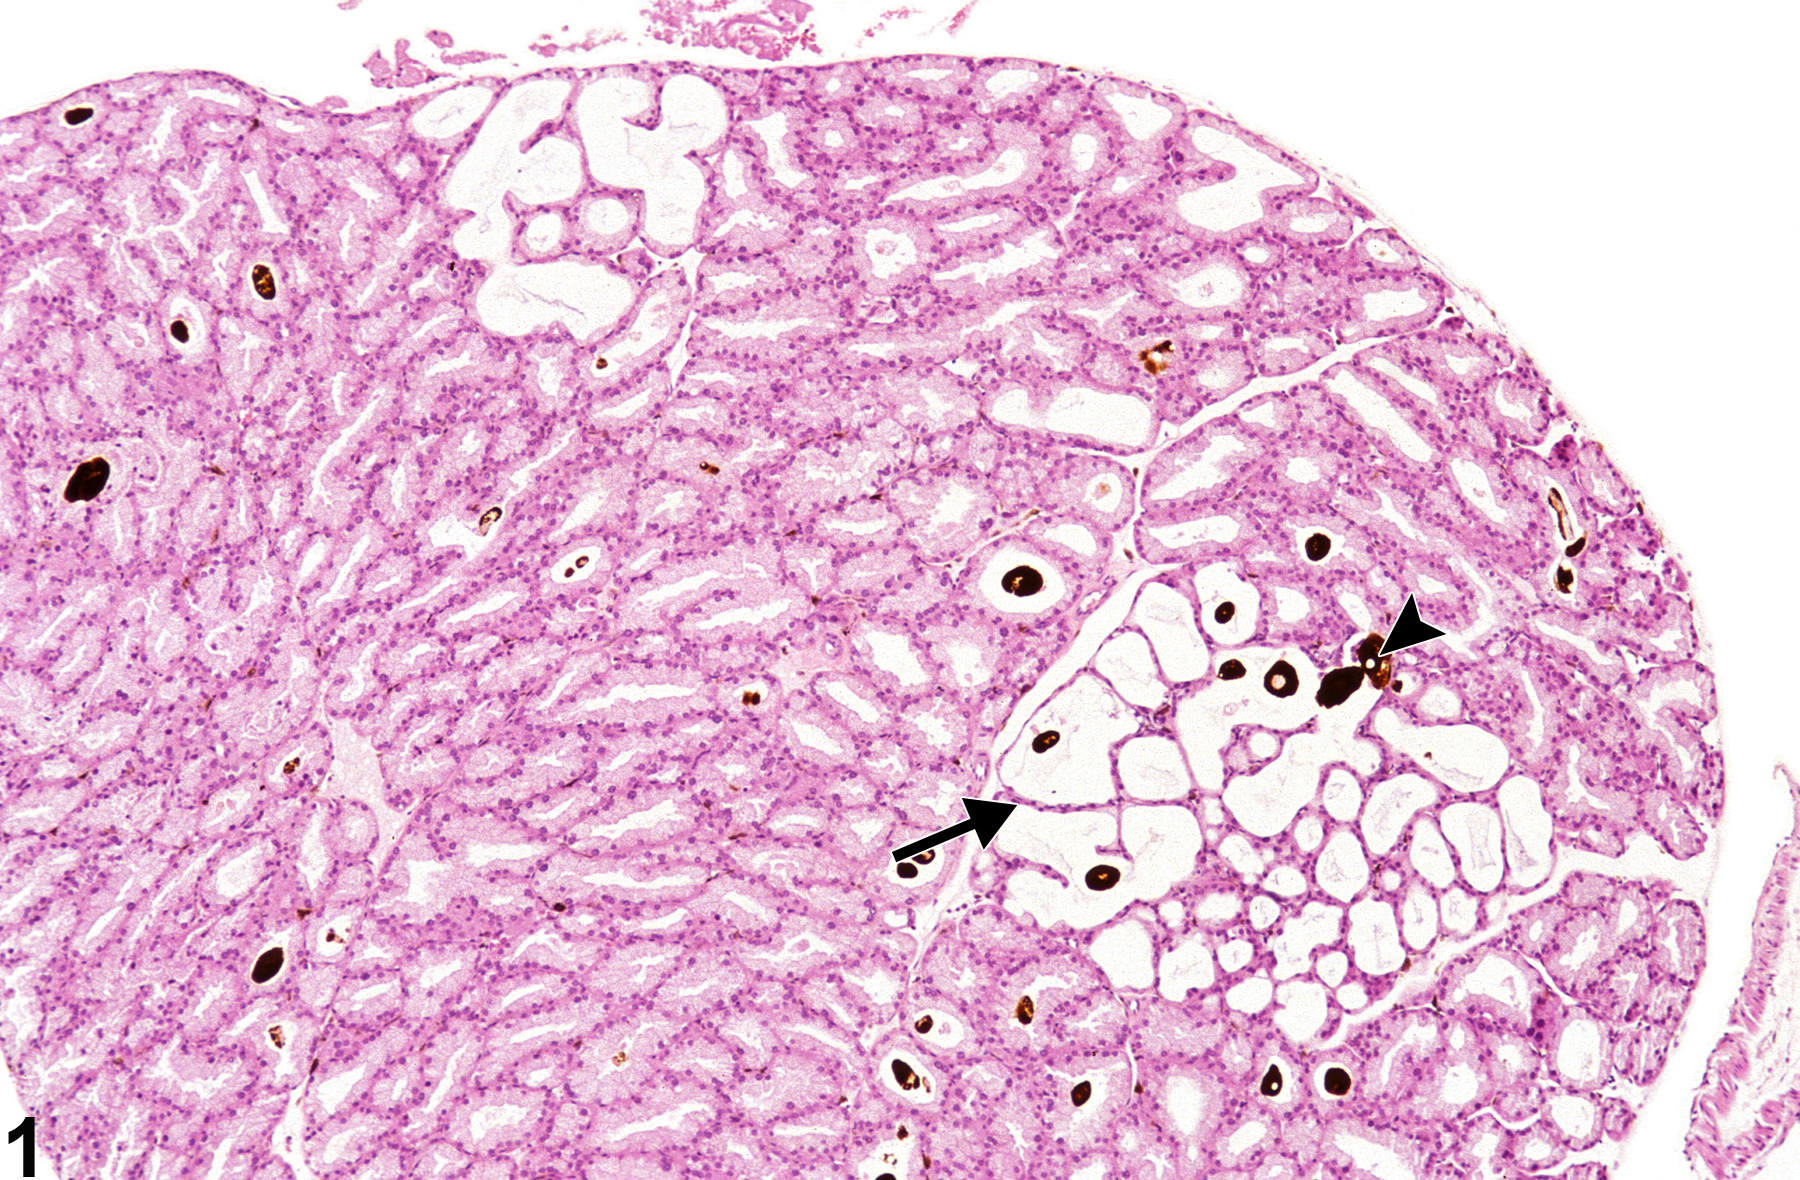 Image of dilation in the Harderian gland from a male B6C3F1 mouse in a chronic study